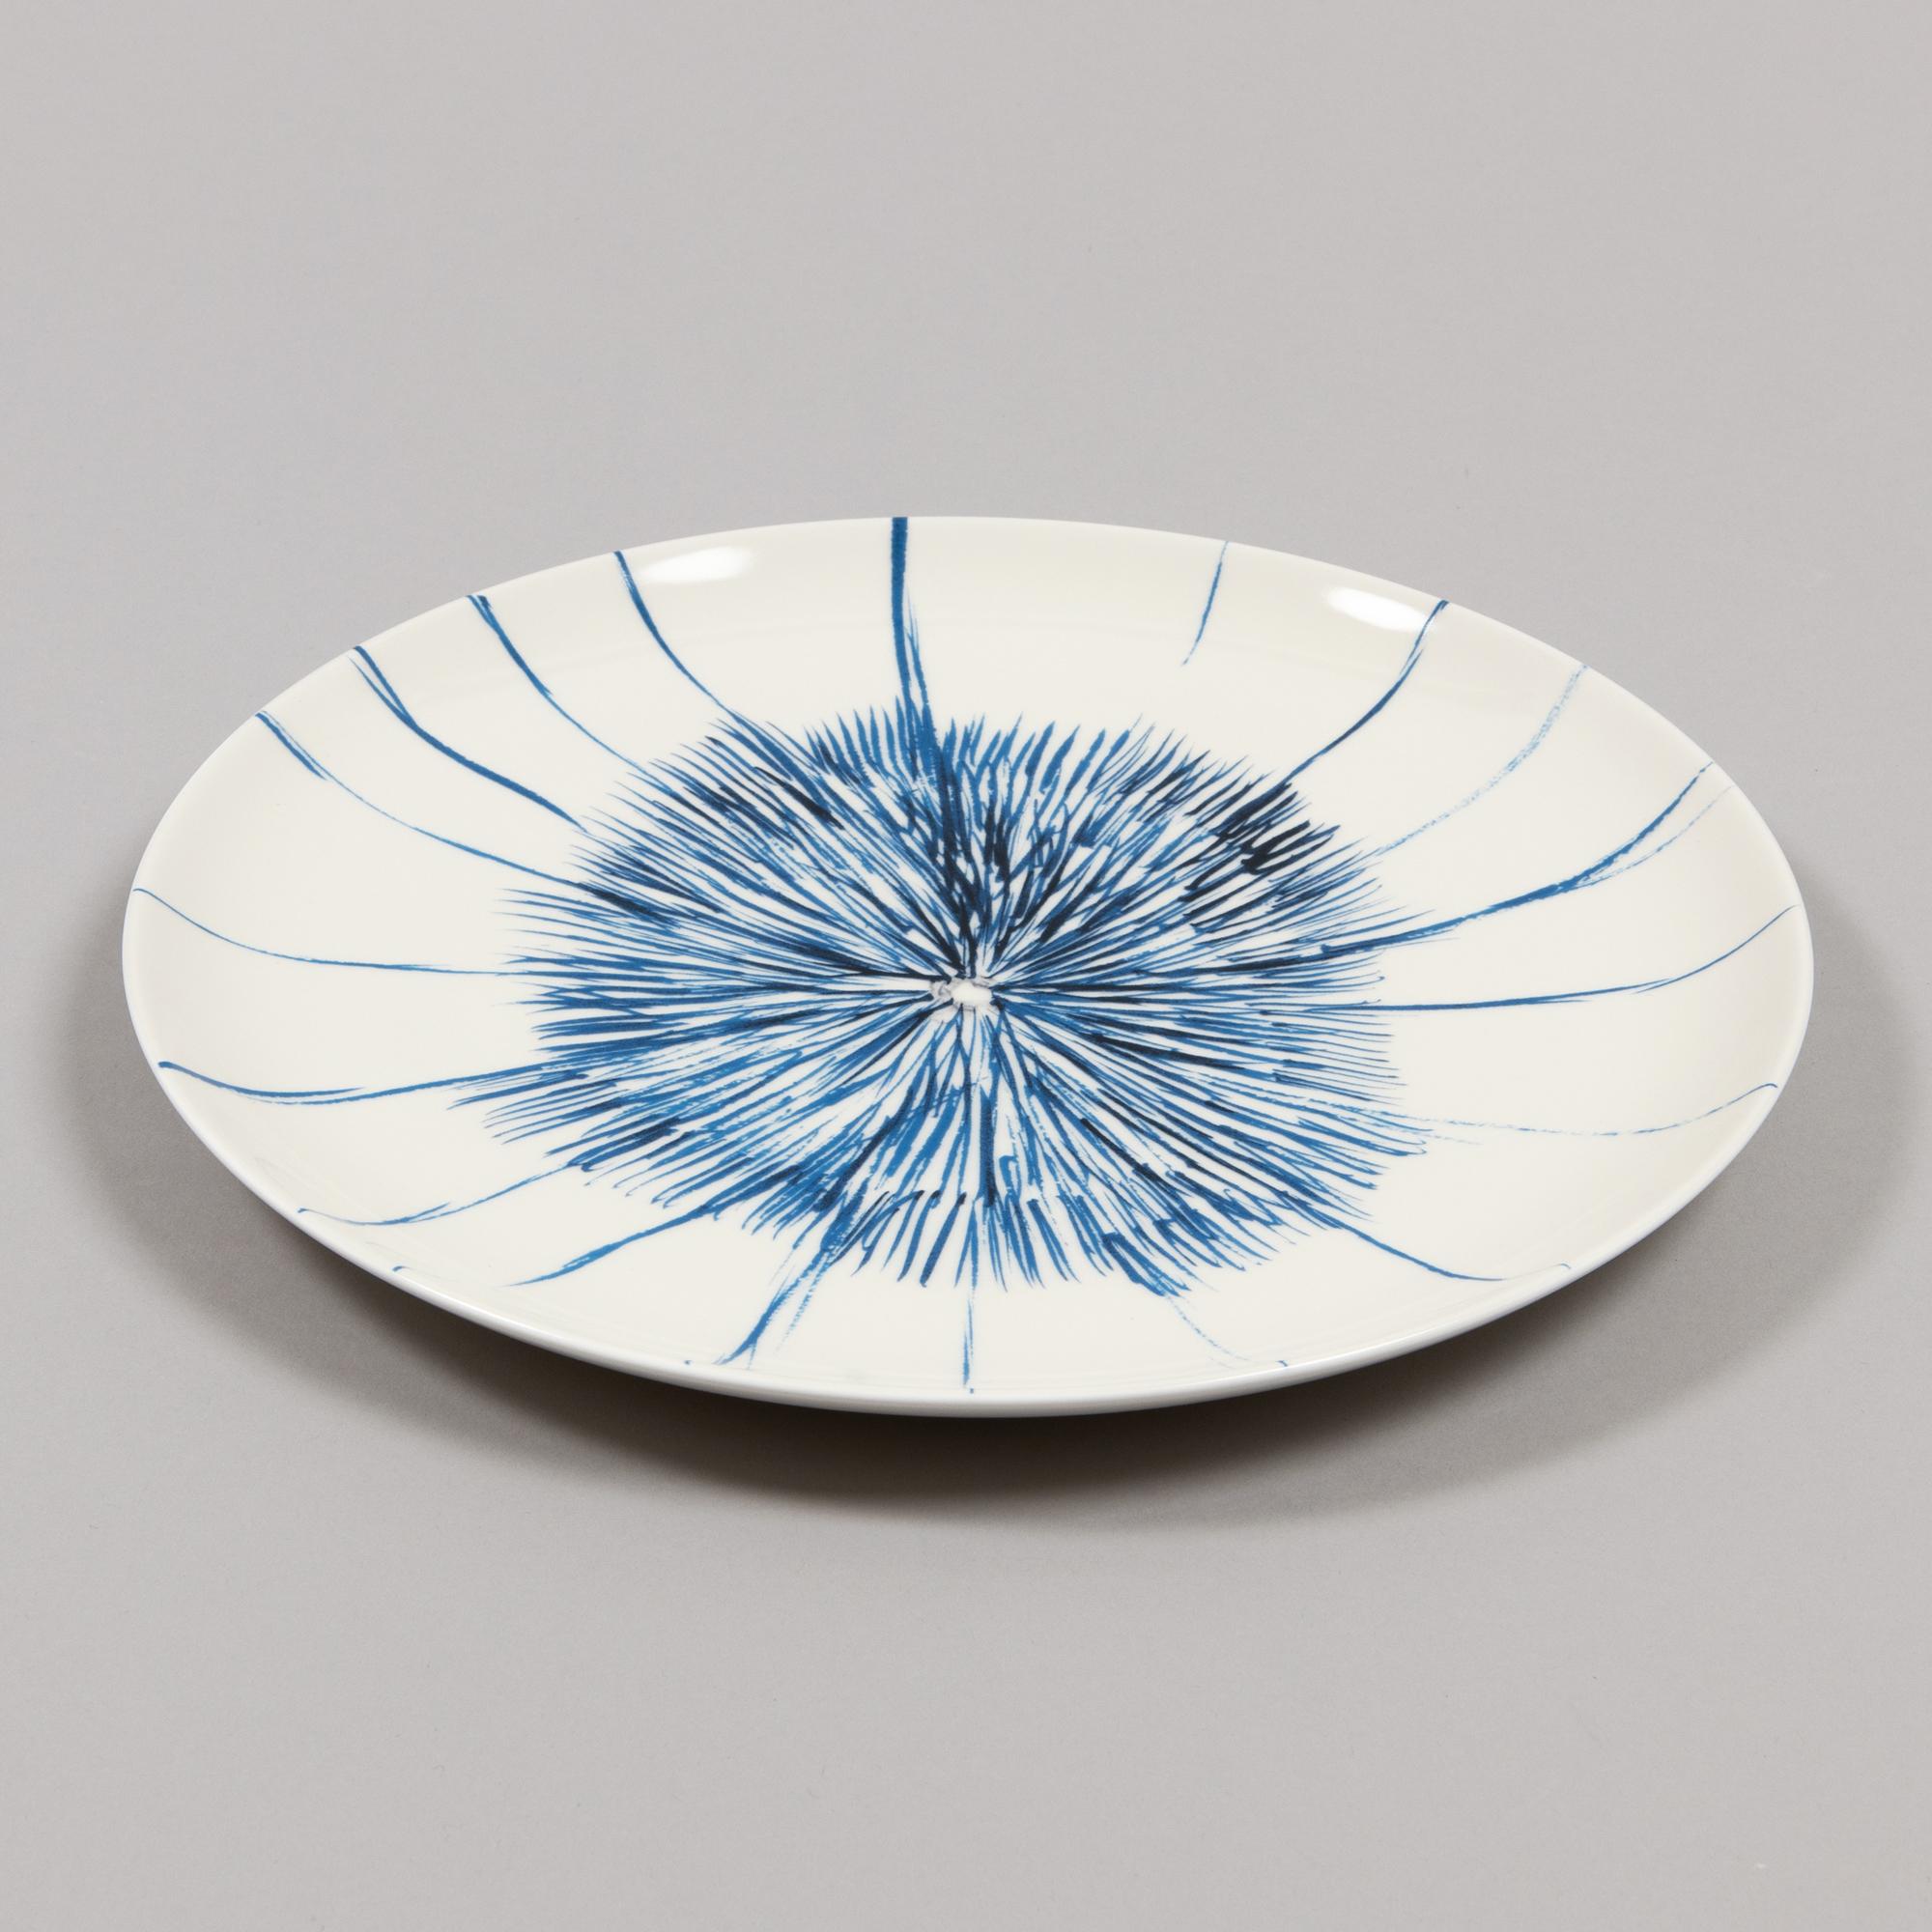 Louise Bourgeois, Je t'aime - Limited Edition Porcelain Plate, Abstract Art 3